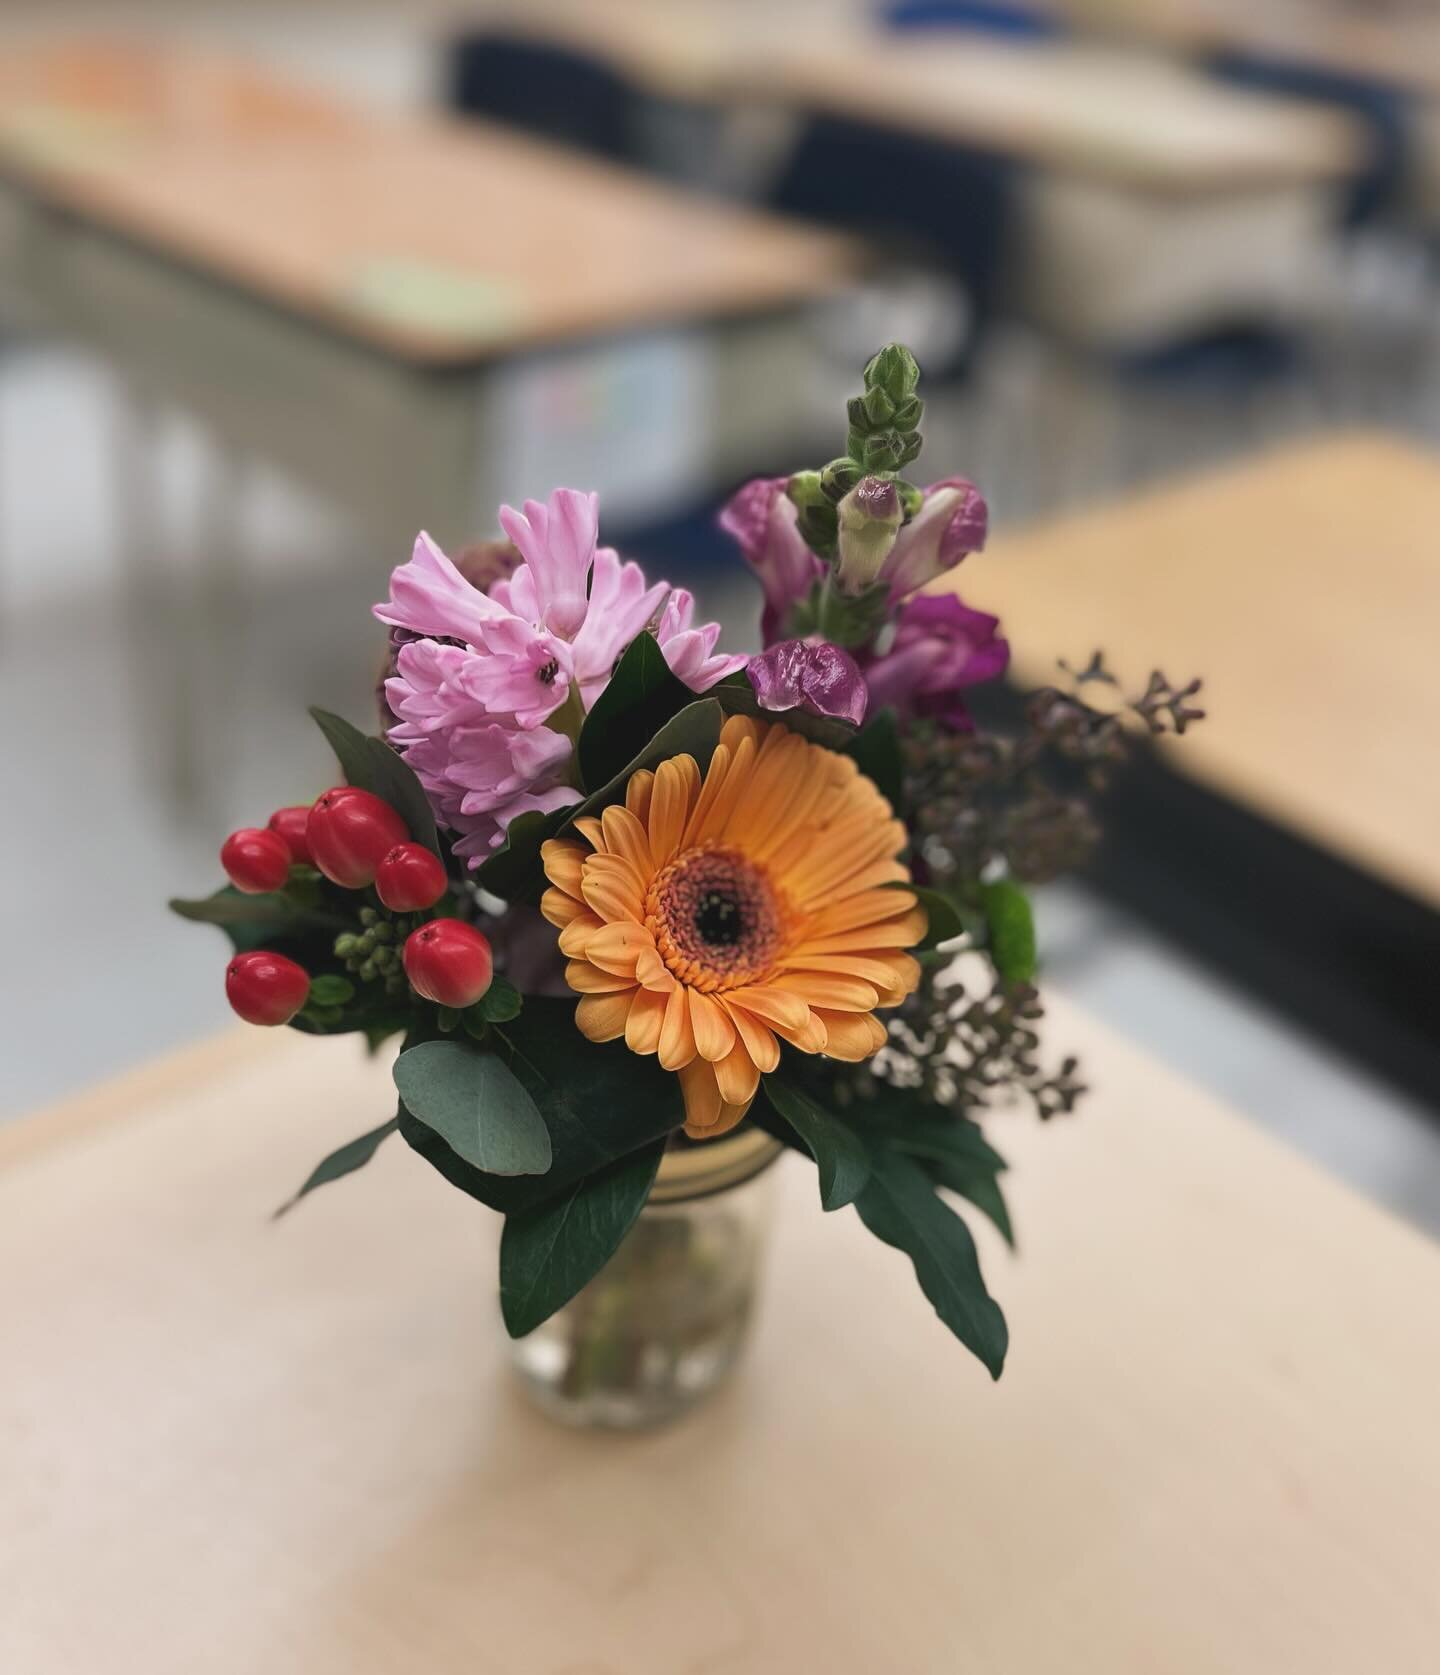 Arrived at work Monday morning to discover this bouquet of encouragement on my desk. After a little sleuthing, I discovered a dear friend of mine just wanted to show how excited she was about the launch of my website and blog. &hearts;️ She had alrea